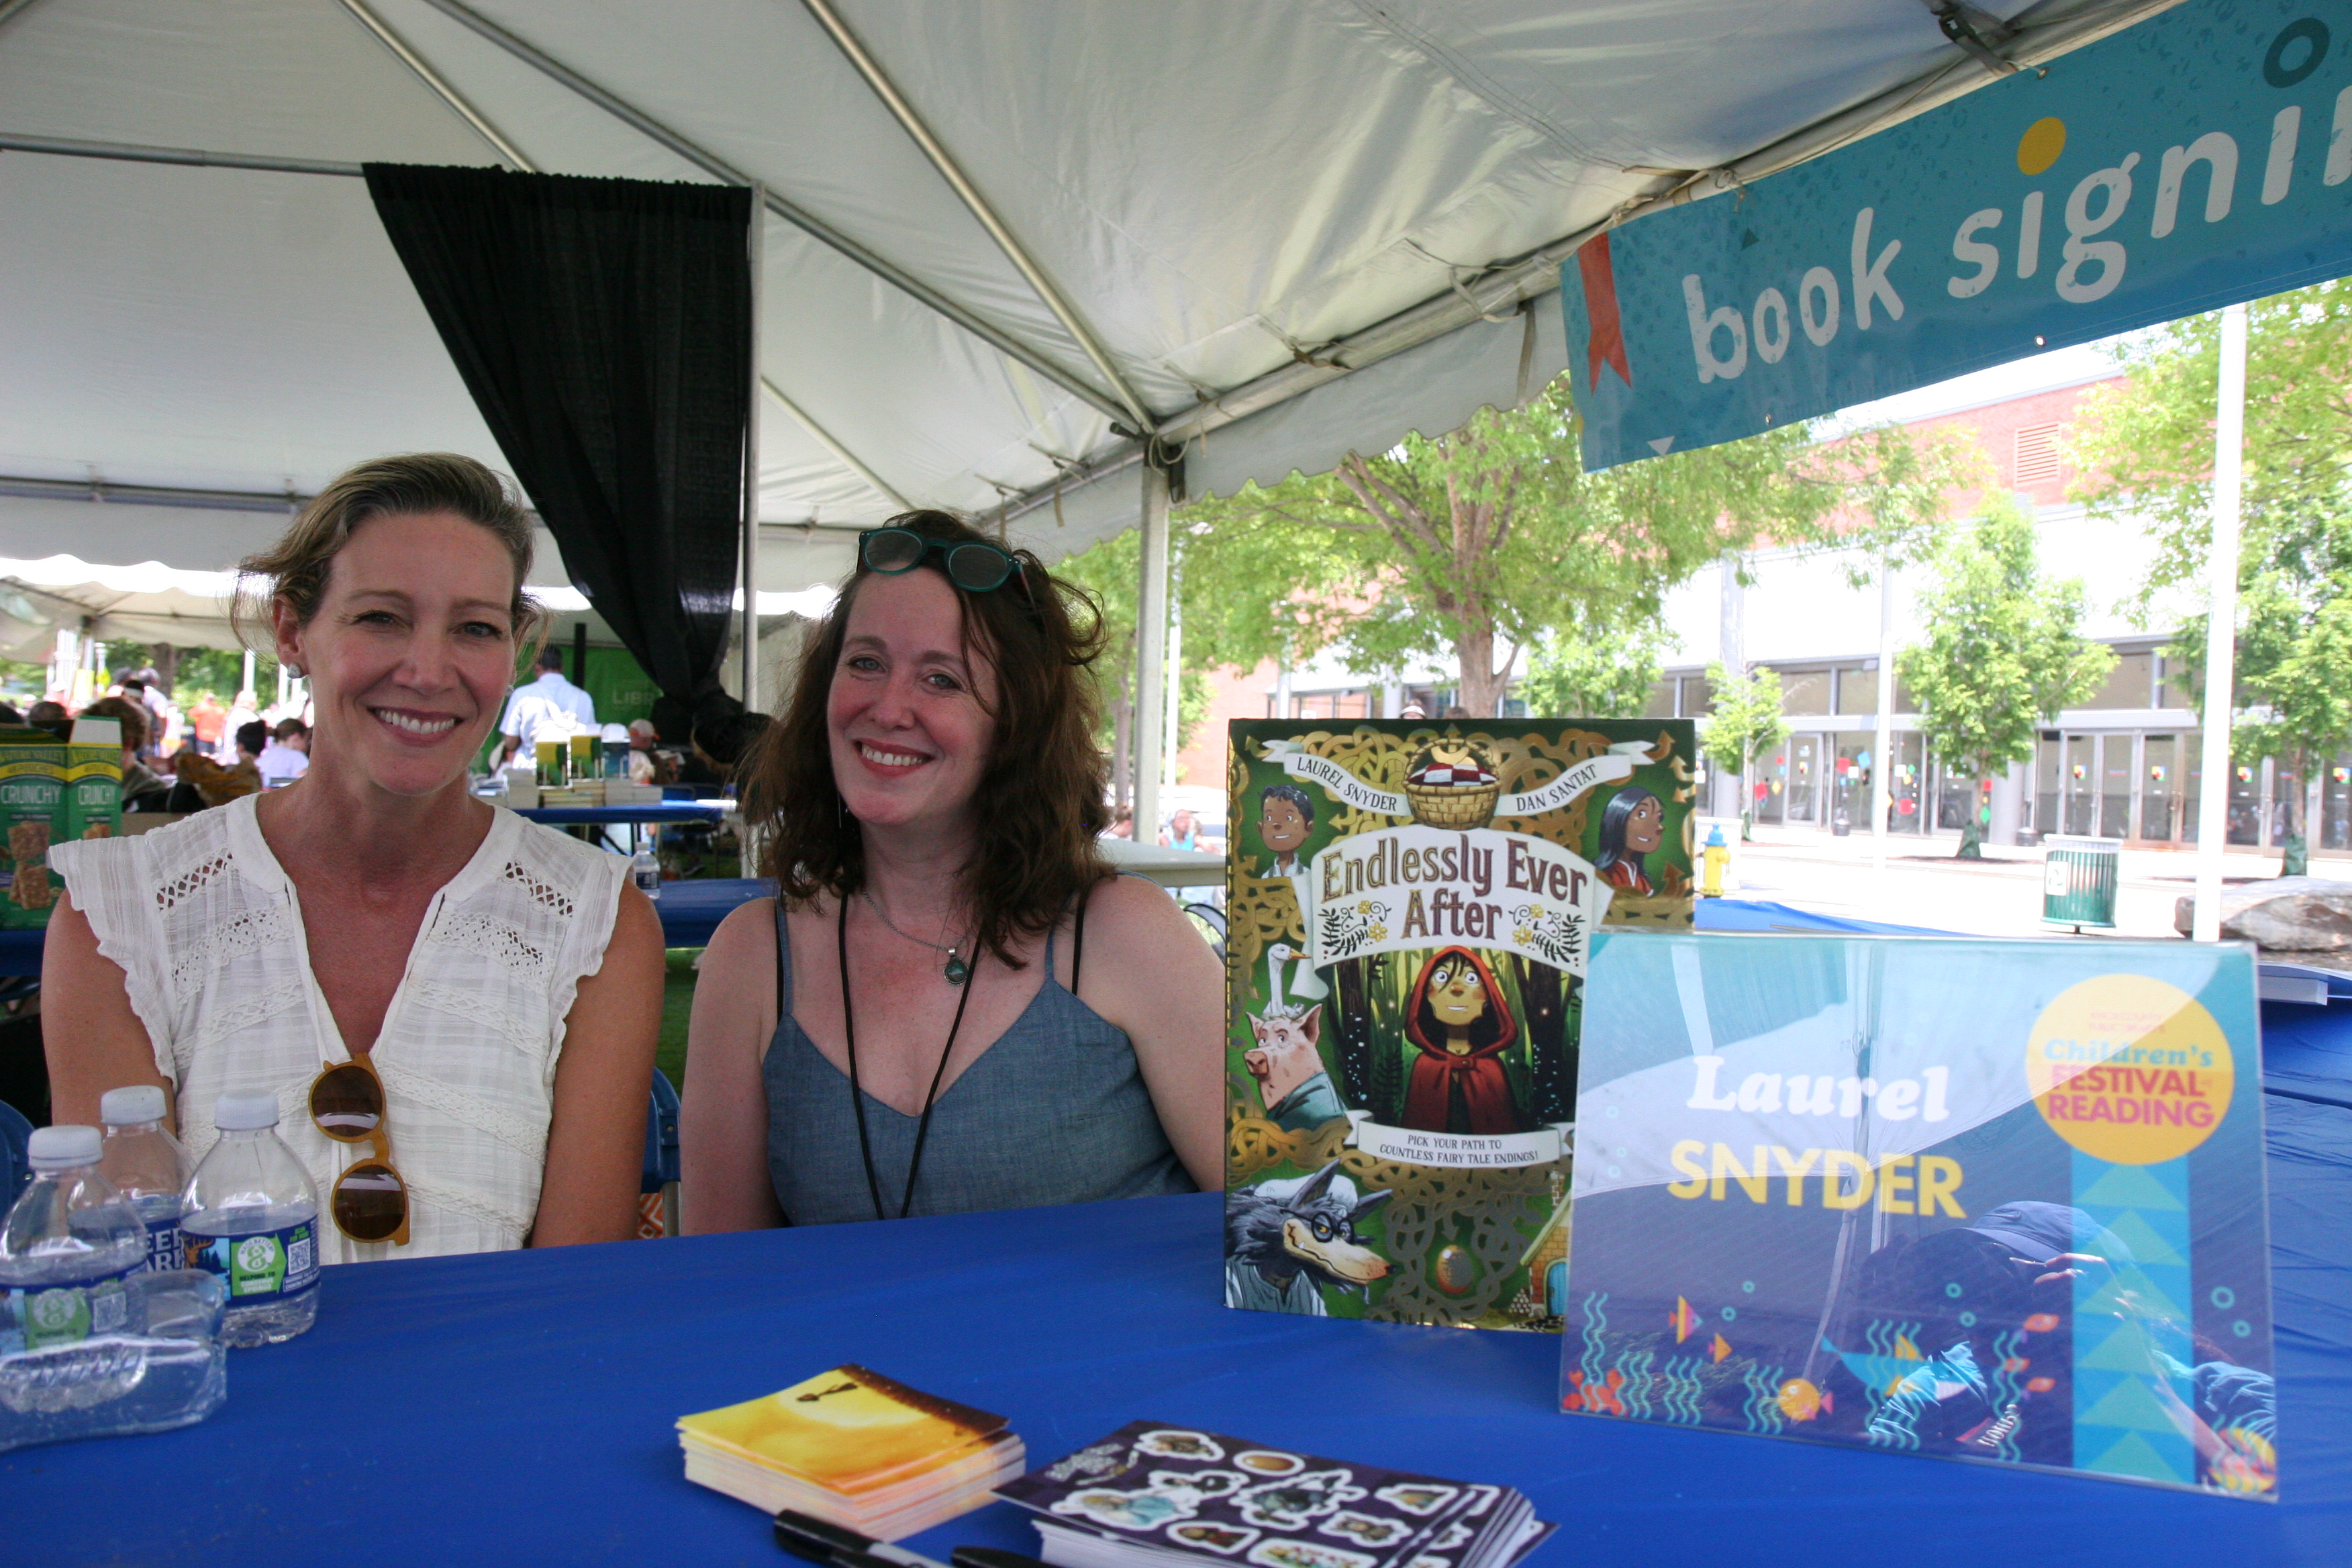 Laurel Snyder and festival volunteer pose with the cover of Snyder's latest book